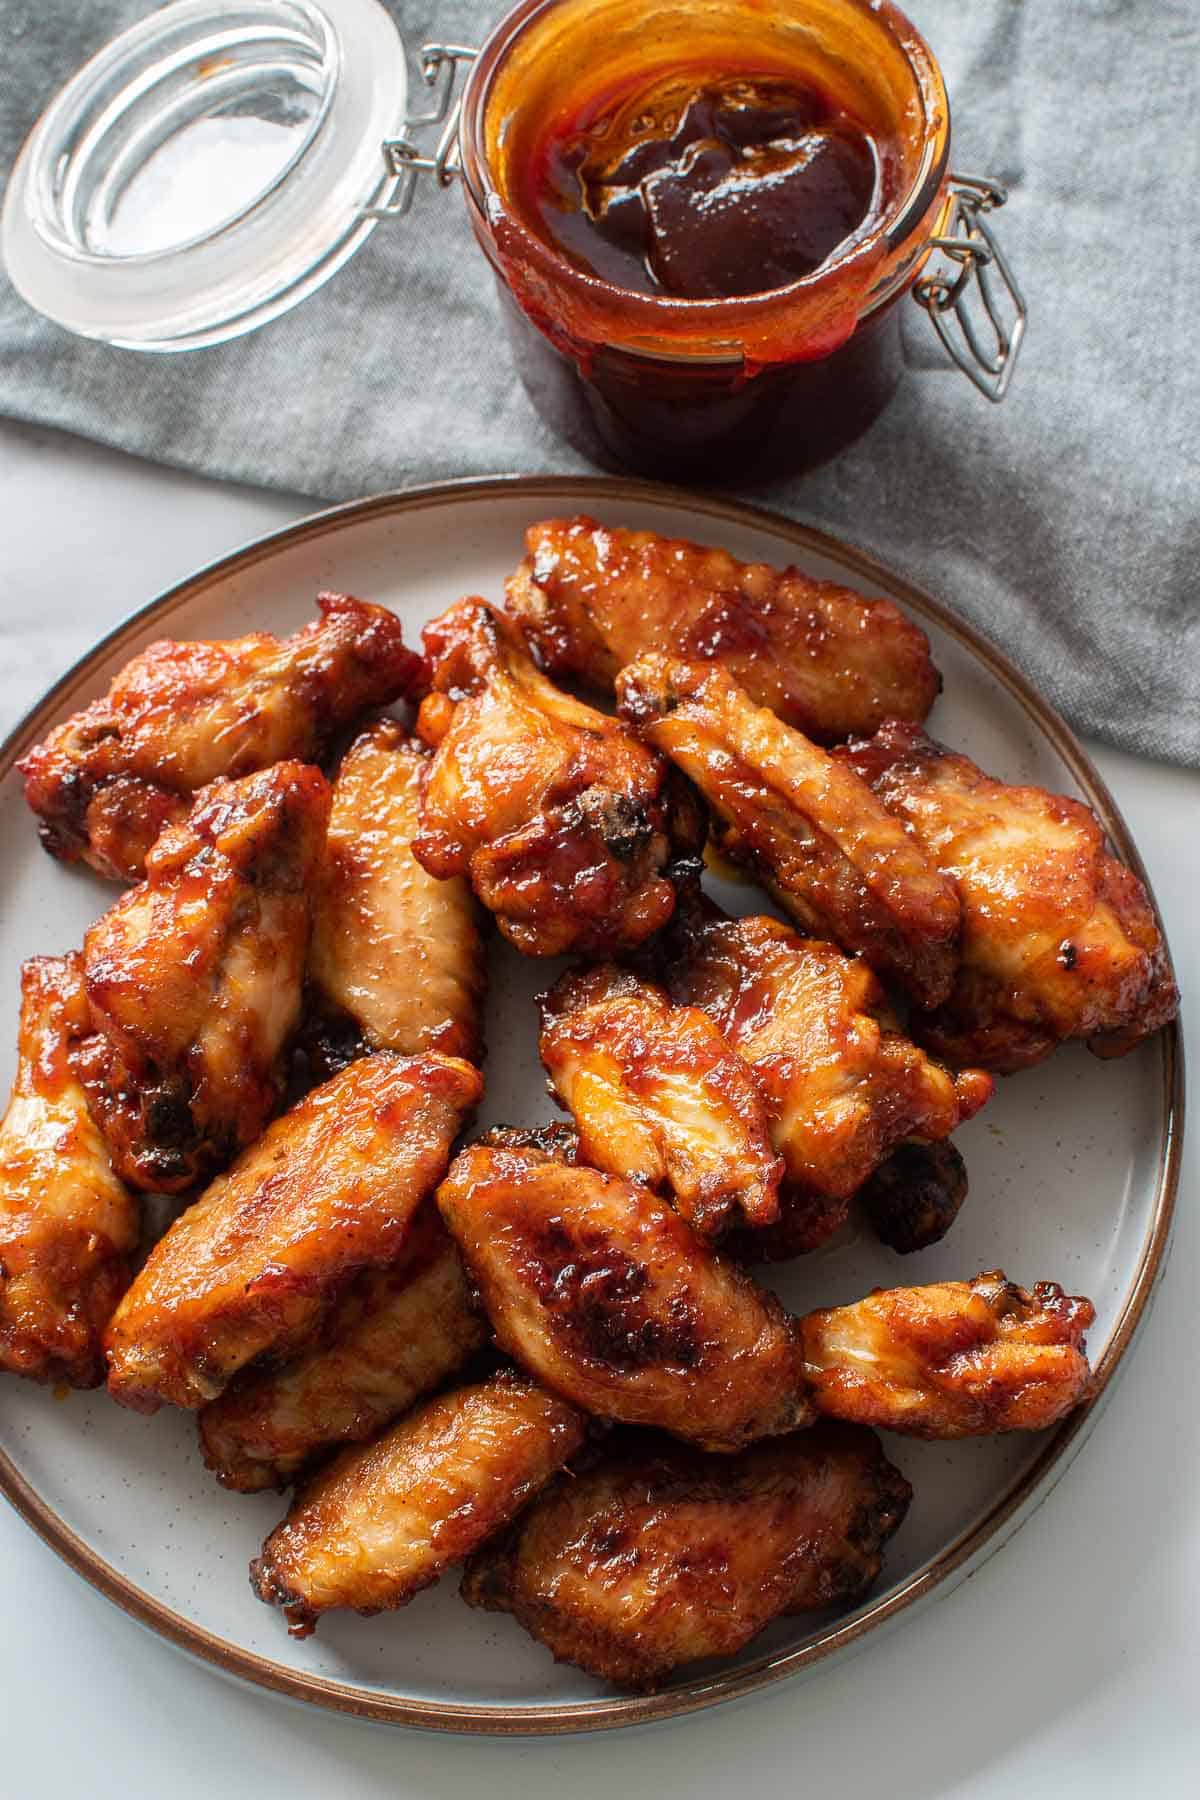 A plate full of baked BBQ wings, with a jar of BBQ sauce on the side.